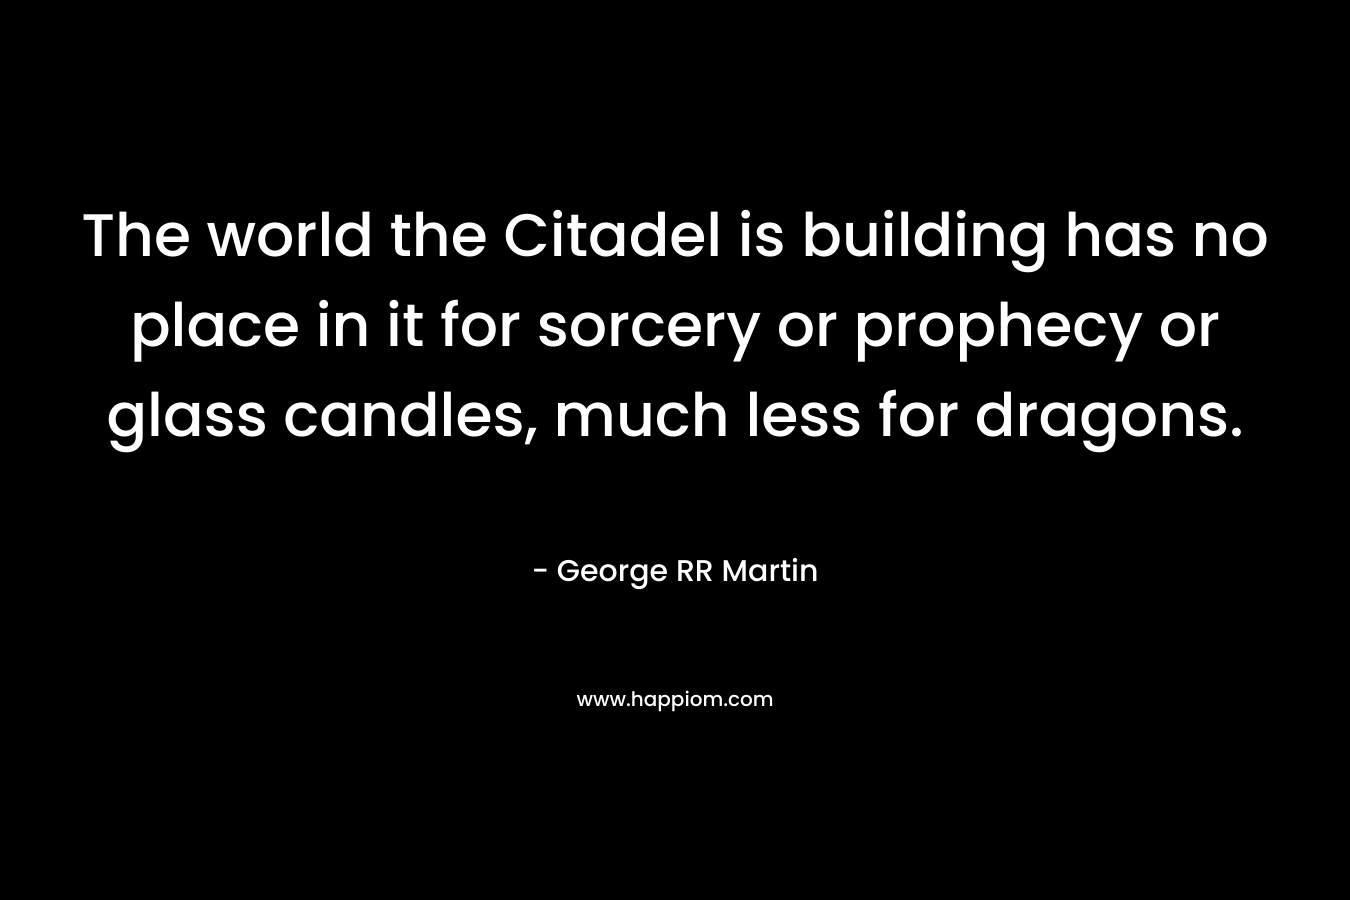 The world the Citadel is building has no place in it for sorcery or prophecy or glass candles, much less for dragons. – George RR Martin